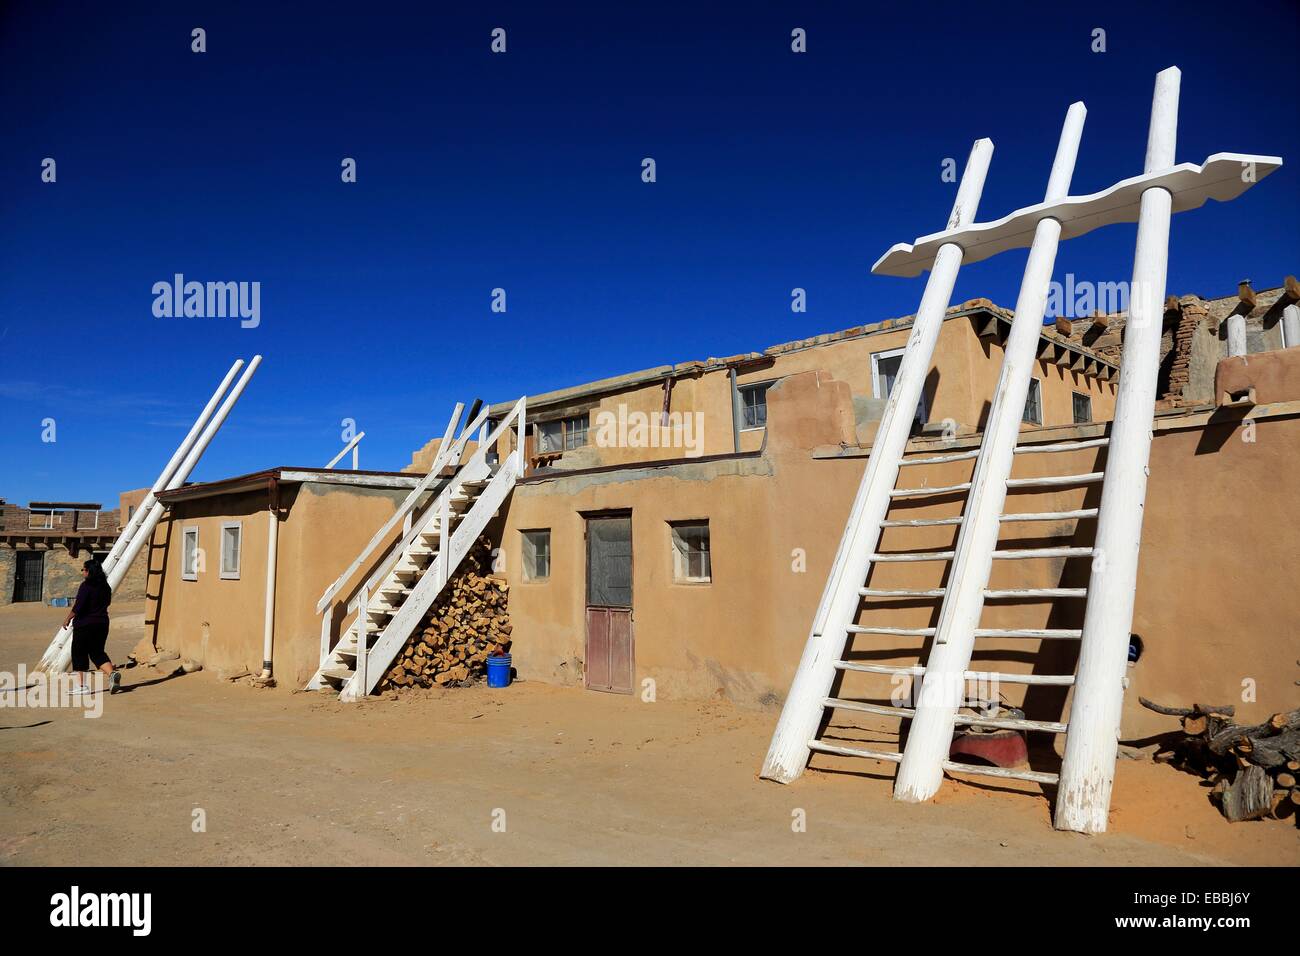 2nd Acoma Pueblo adobe Aka America architecture building built structure chamber city color image contemplation culture day Stock Photo